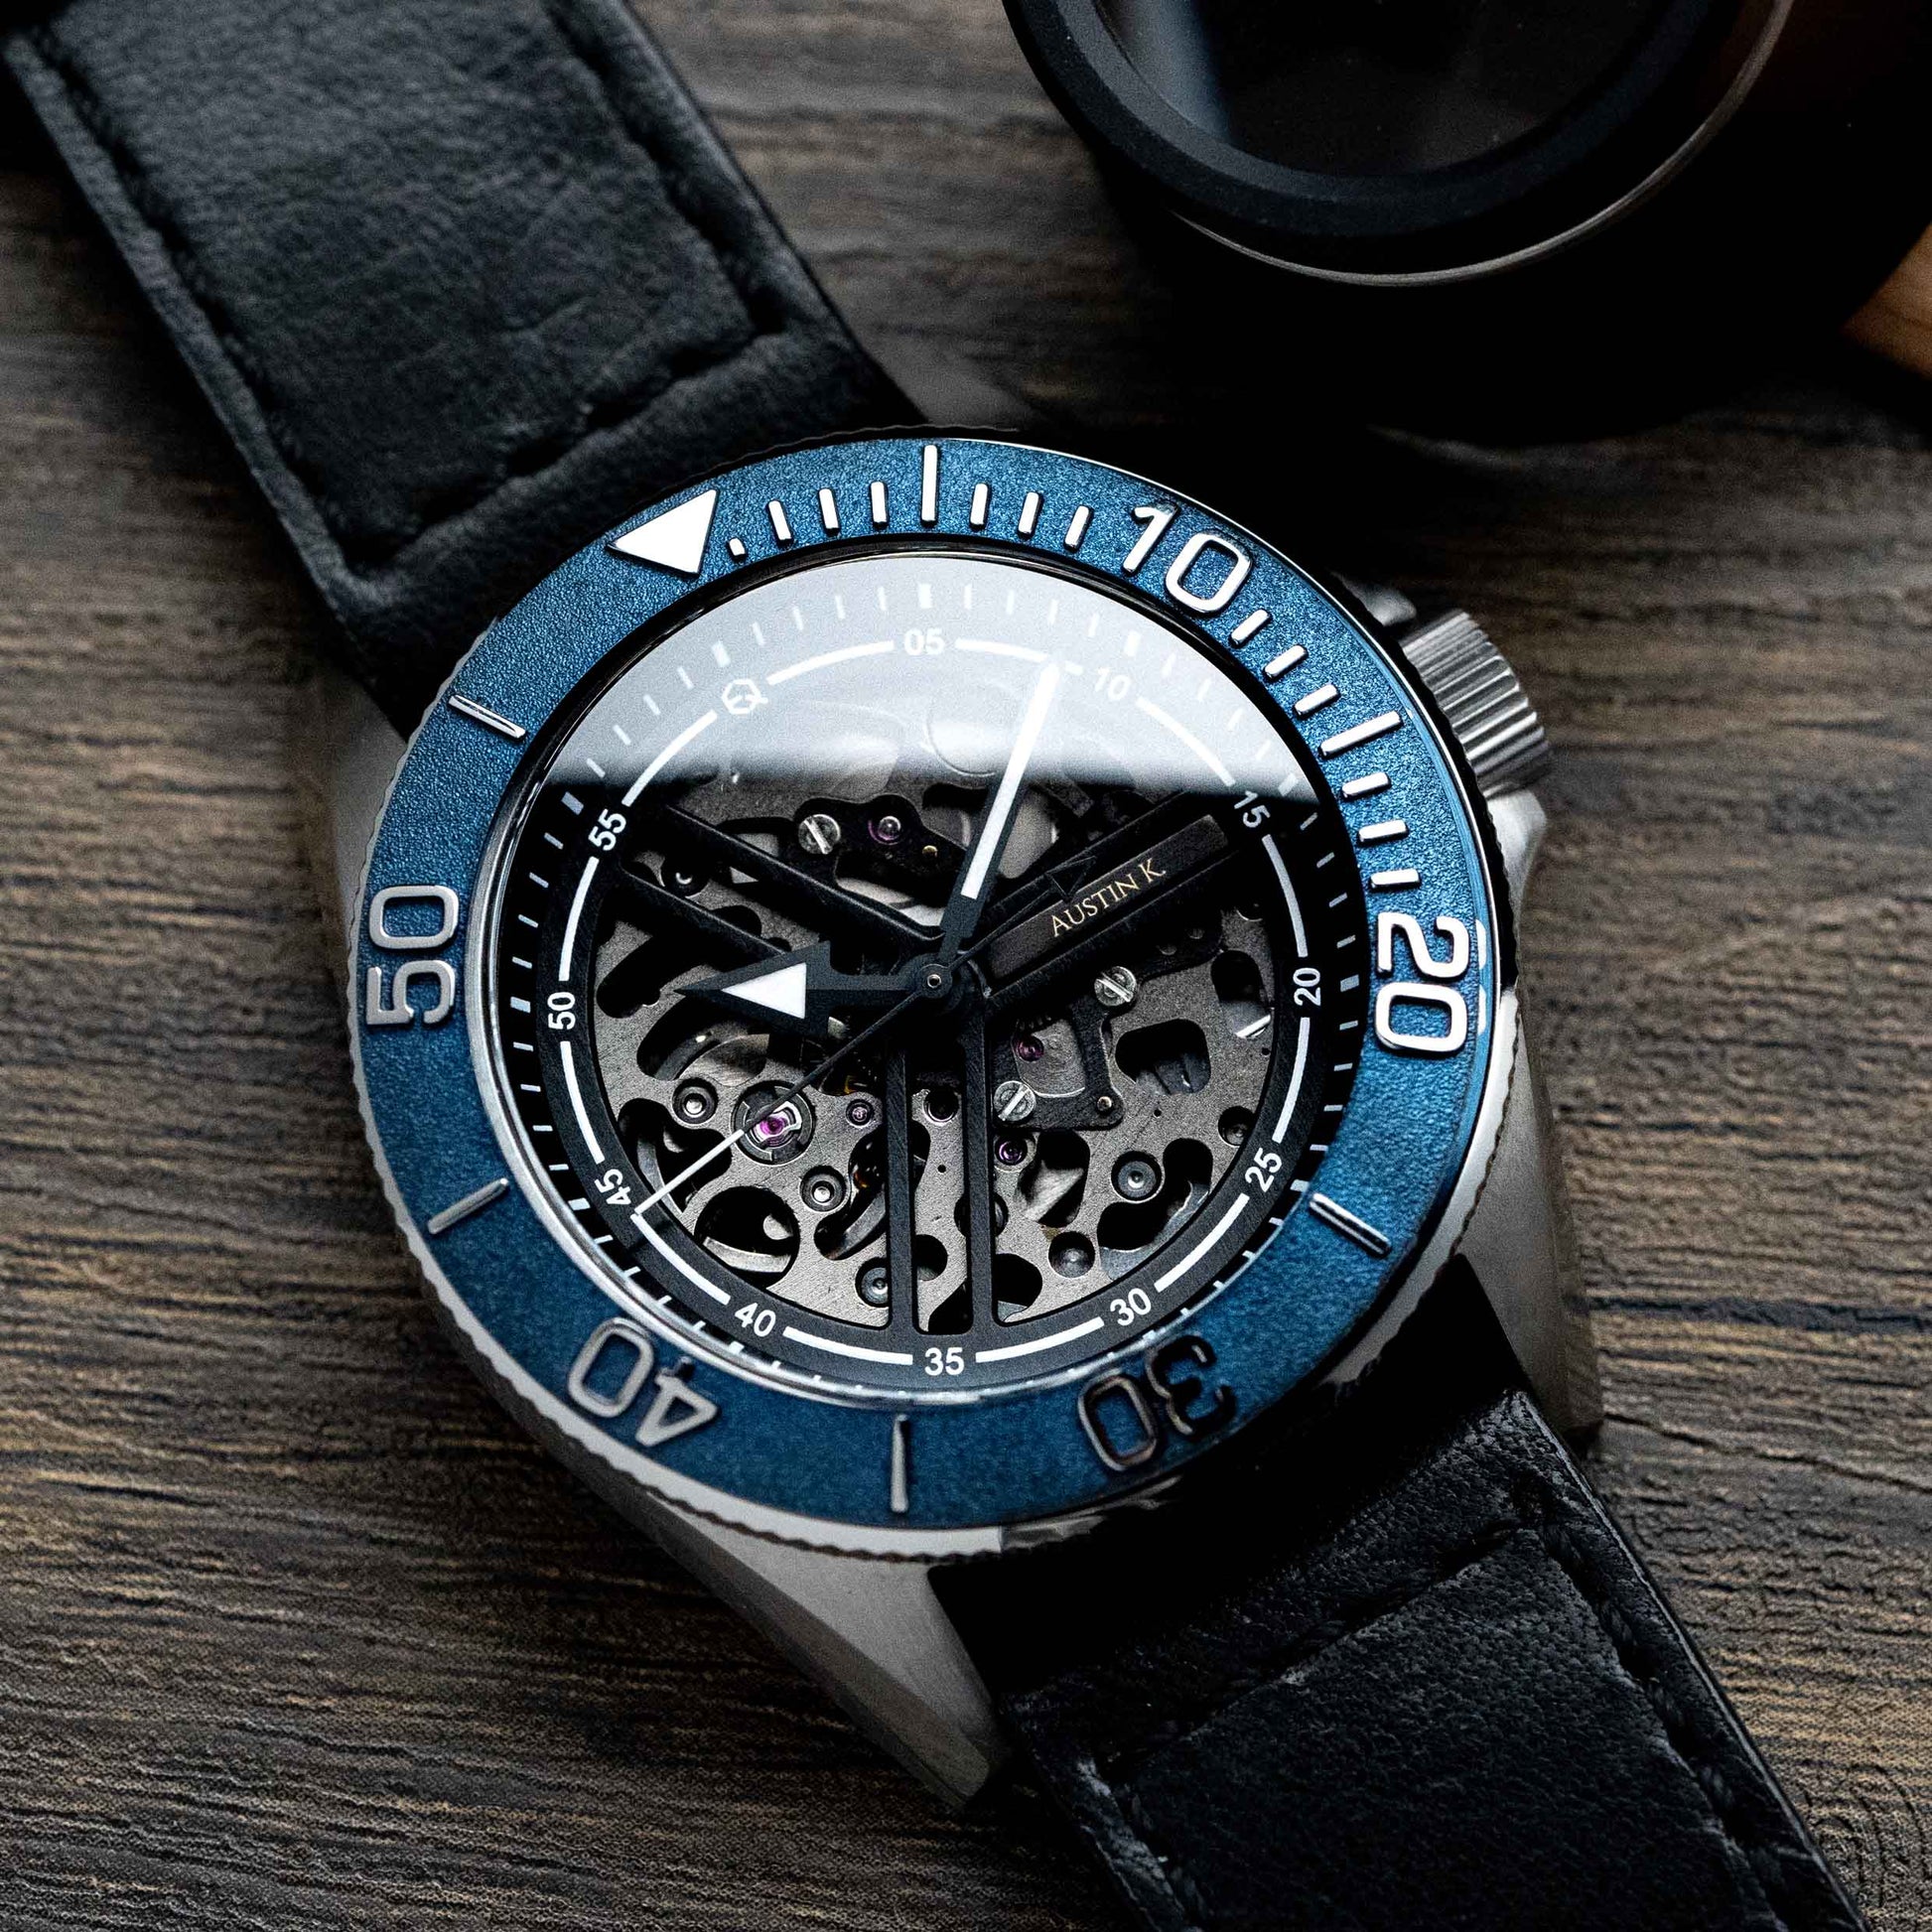 EONIQ dive watch (Skeleton dive watch) - custom watch with seiko movement and free name engraving - blue bezel insert